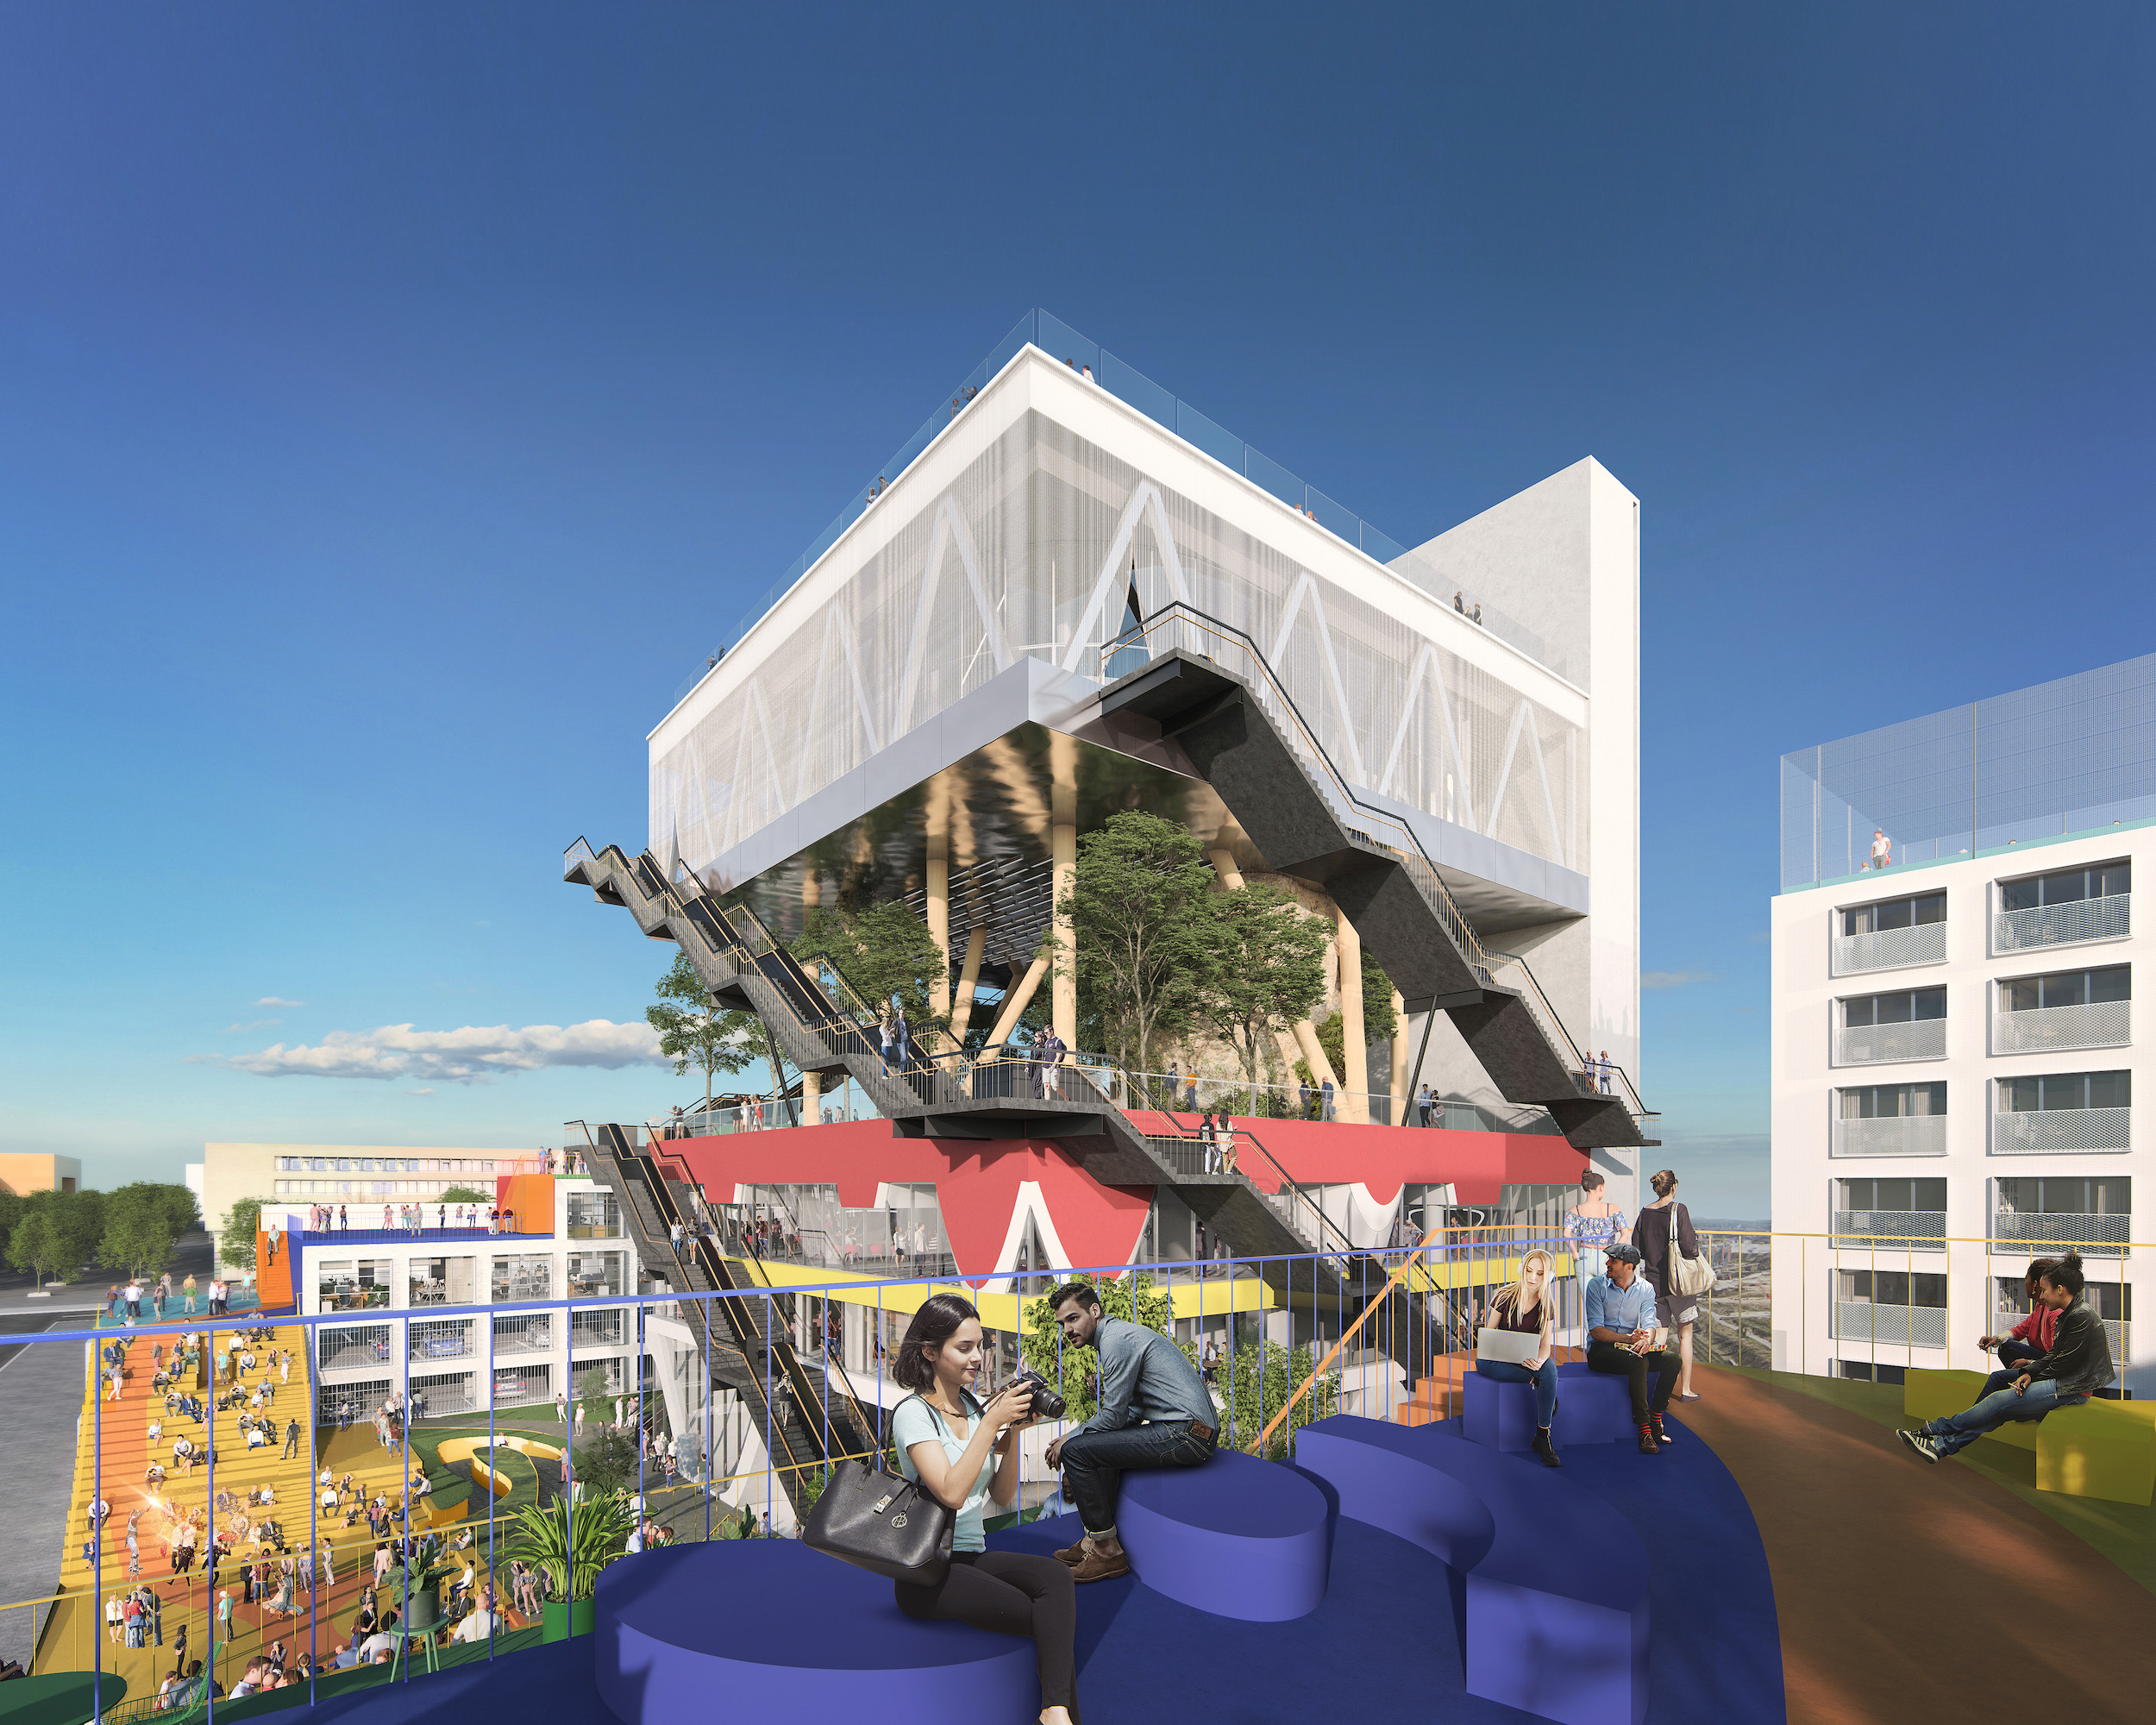 image of expo-pavilion-turned-coworking-space by mvrdv in Hanover